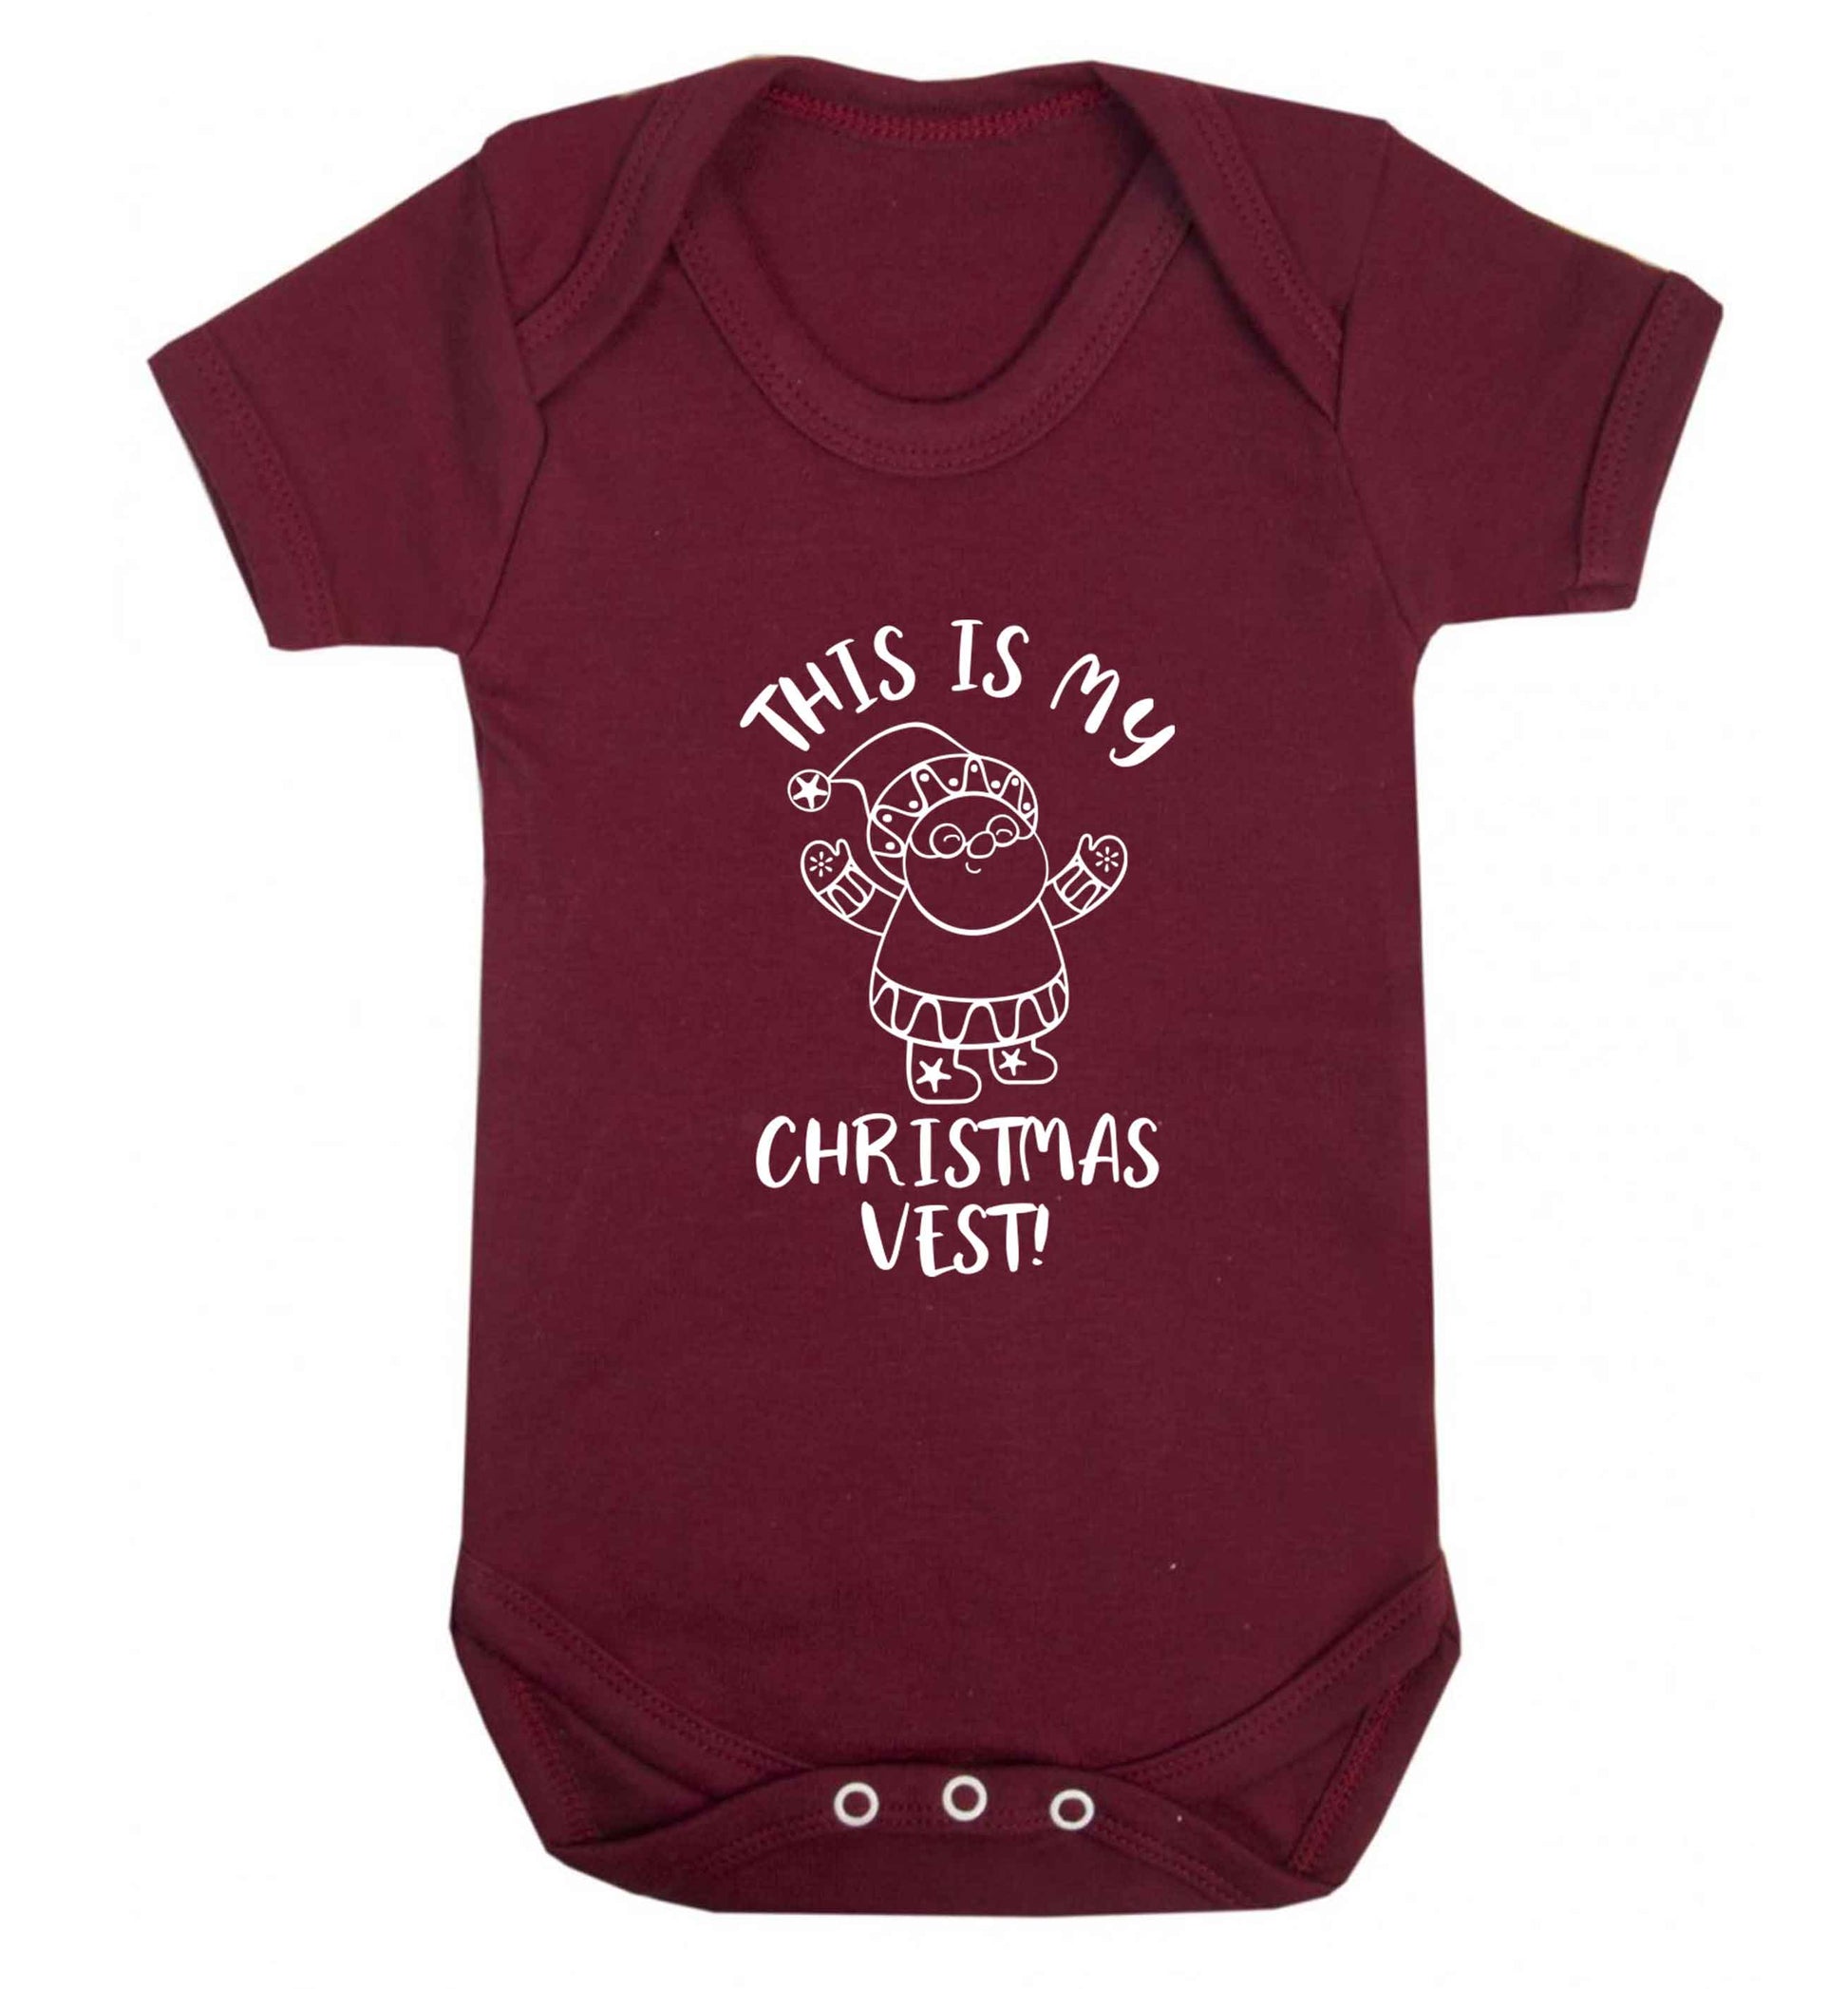 This is my Christmas vest Baby Vest maroon 18-24 months